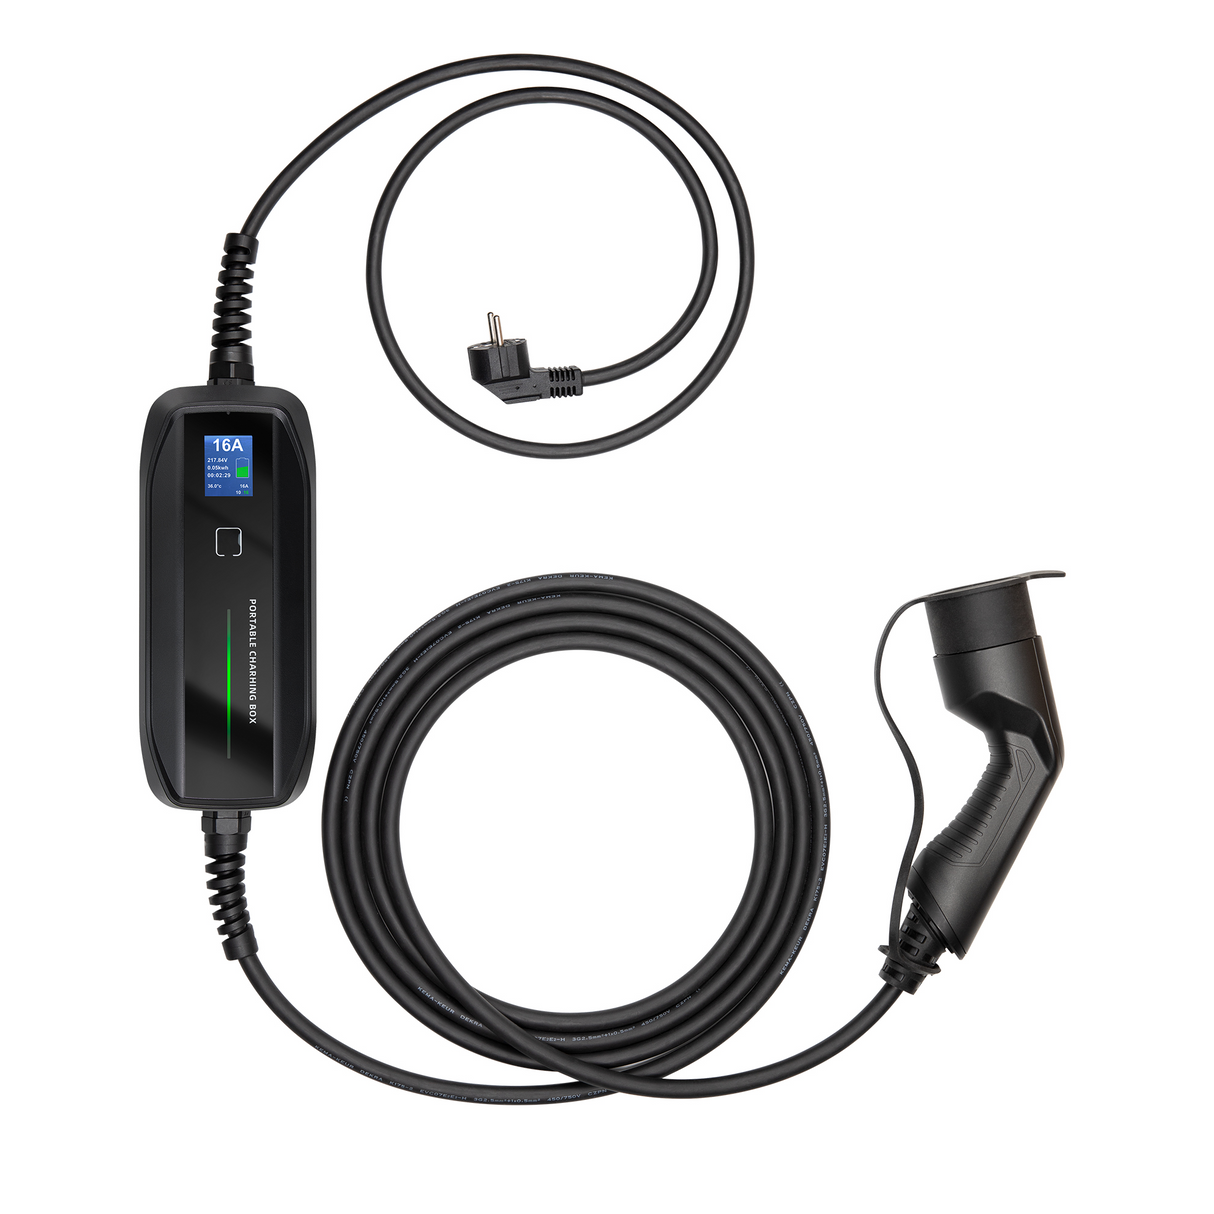 Mobile Charger Kia Sportage - Besen with LCD - Type 2 to Schuko